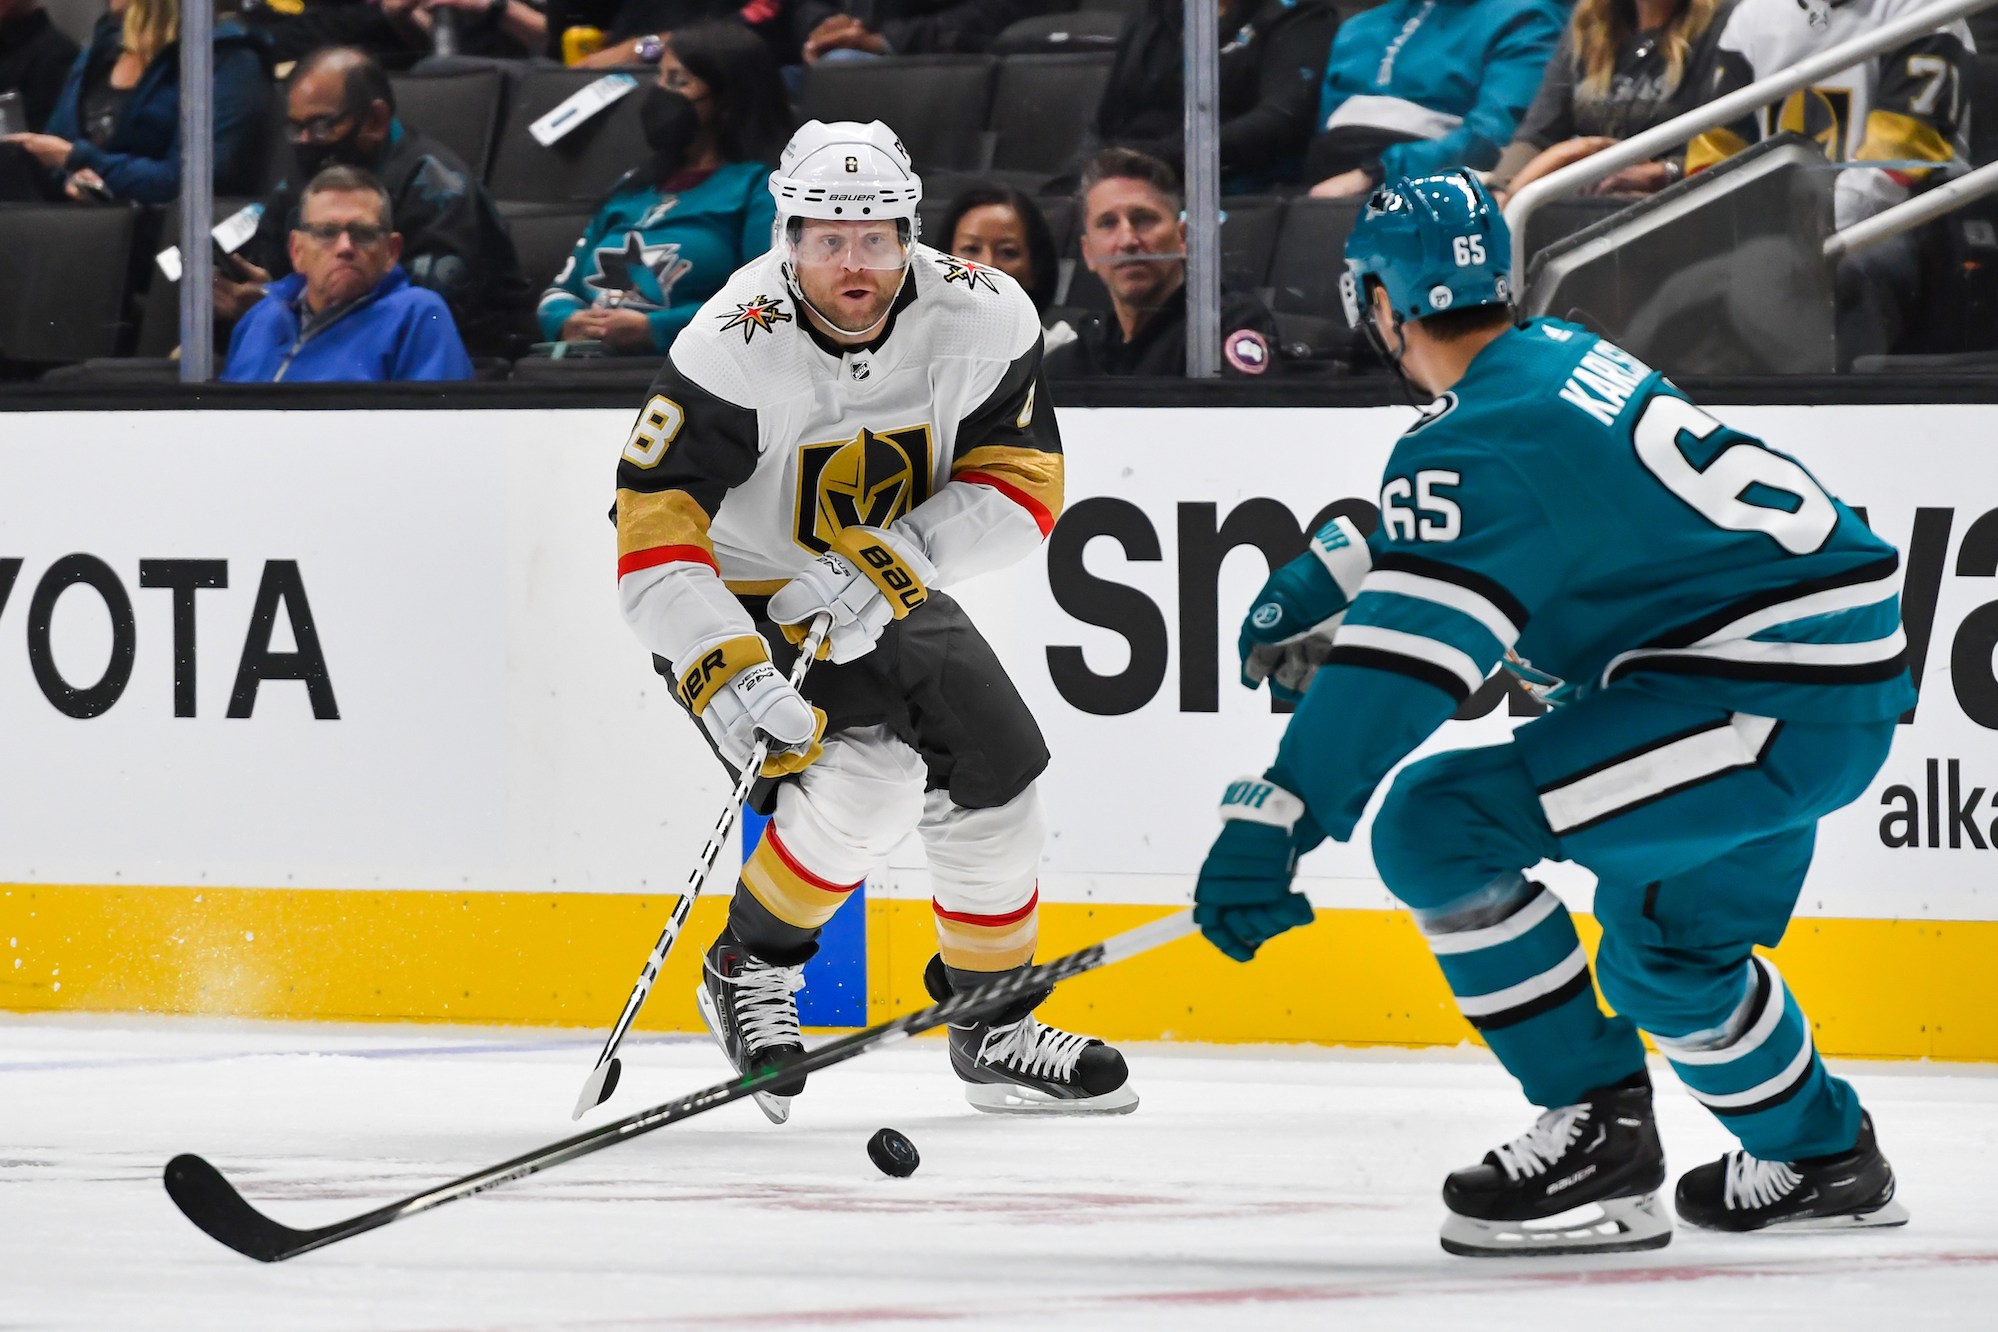 SAN JOSE, CA - OCTOBER 25:Vegas Golden Knights center Phil Kessel (8) goes after the puck against San Jose Sharks defenseman Erik Karlsson (65) while playing in his 990th consecutive game in the match between the Vegas Golden Knights and the San Jose Sharks on Tuesday, October 25, 2022 at the SAP Center in San Jose, California. (Photo by Douglas Stringer/Icon Sportswire via Getty Images)